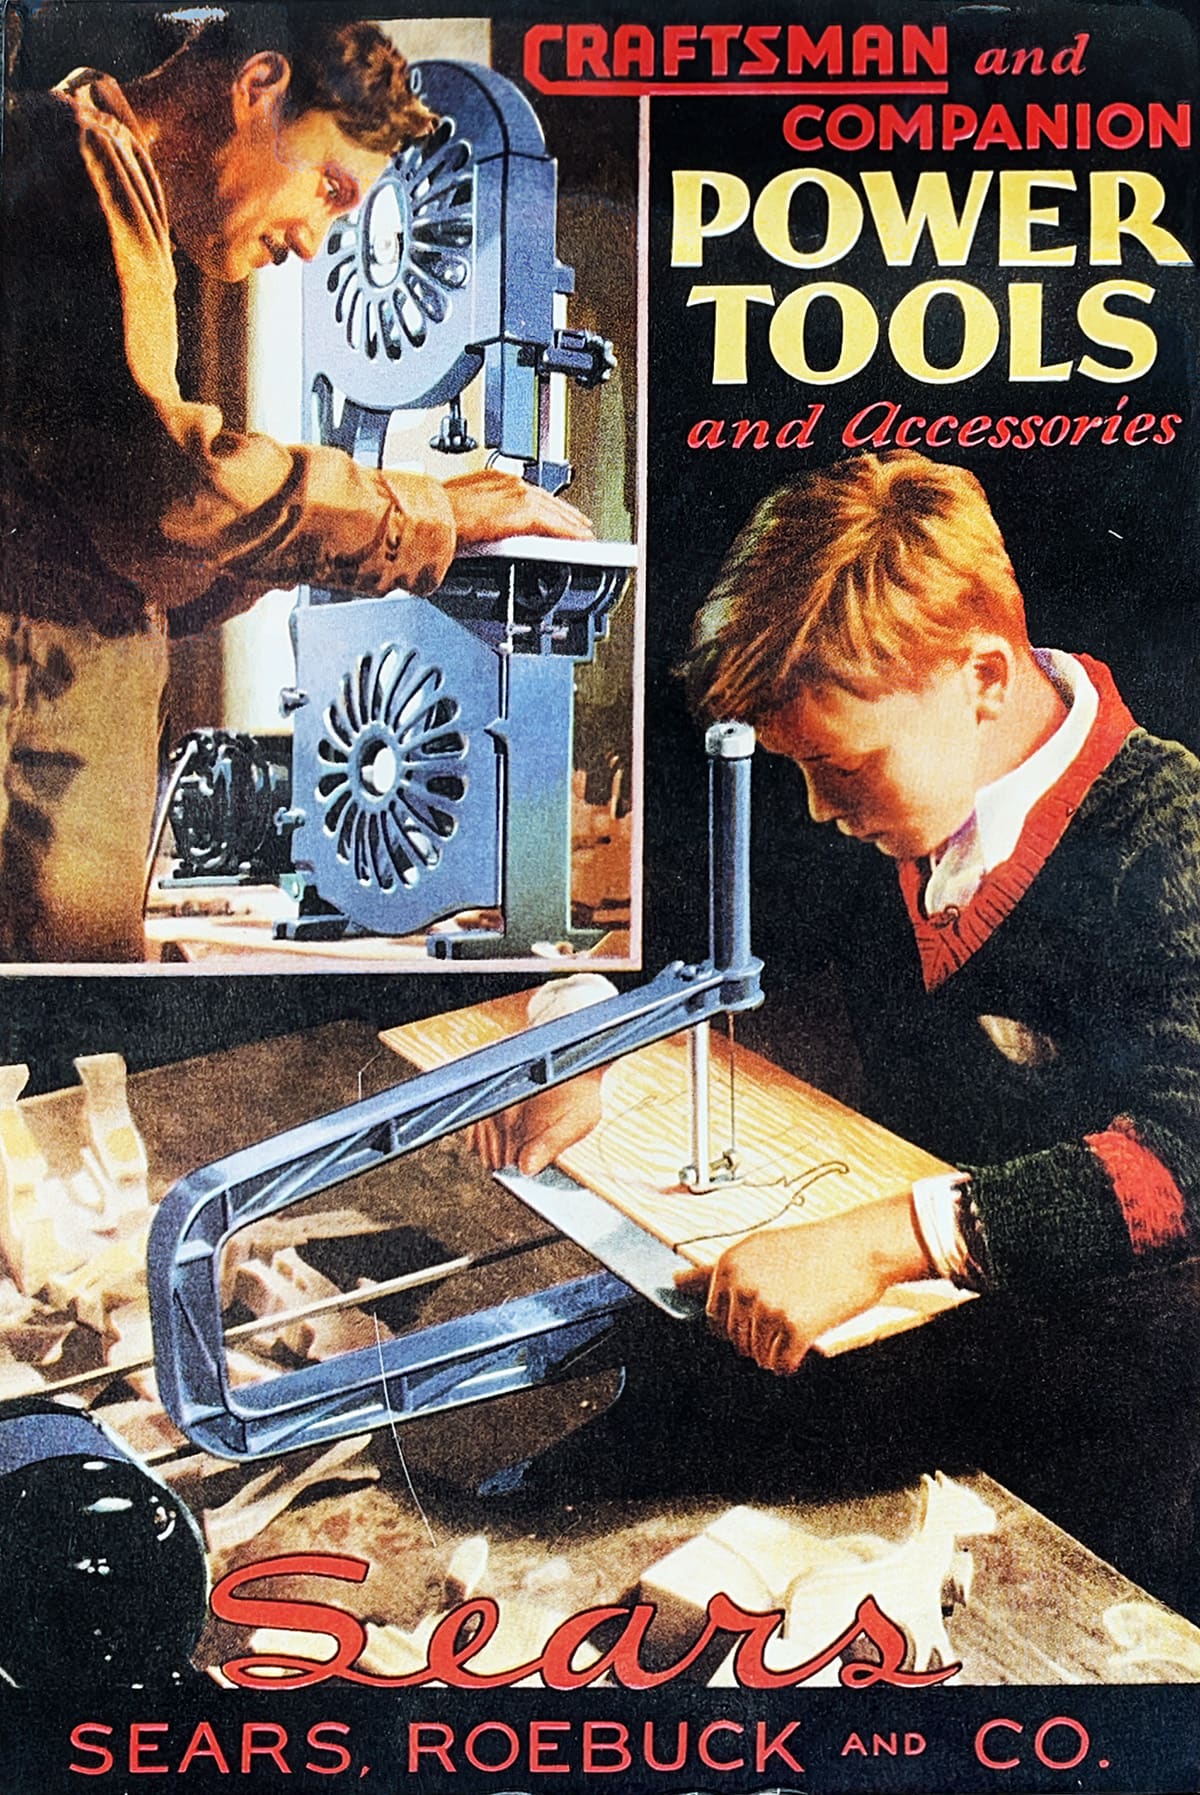 An advertisement for Craftsman tools from the 1940s